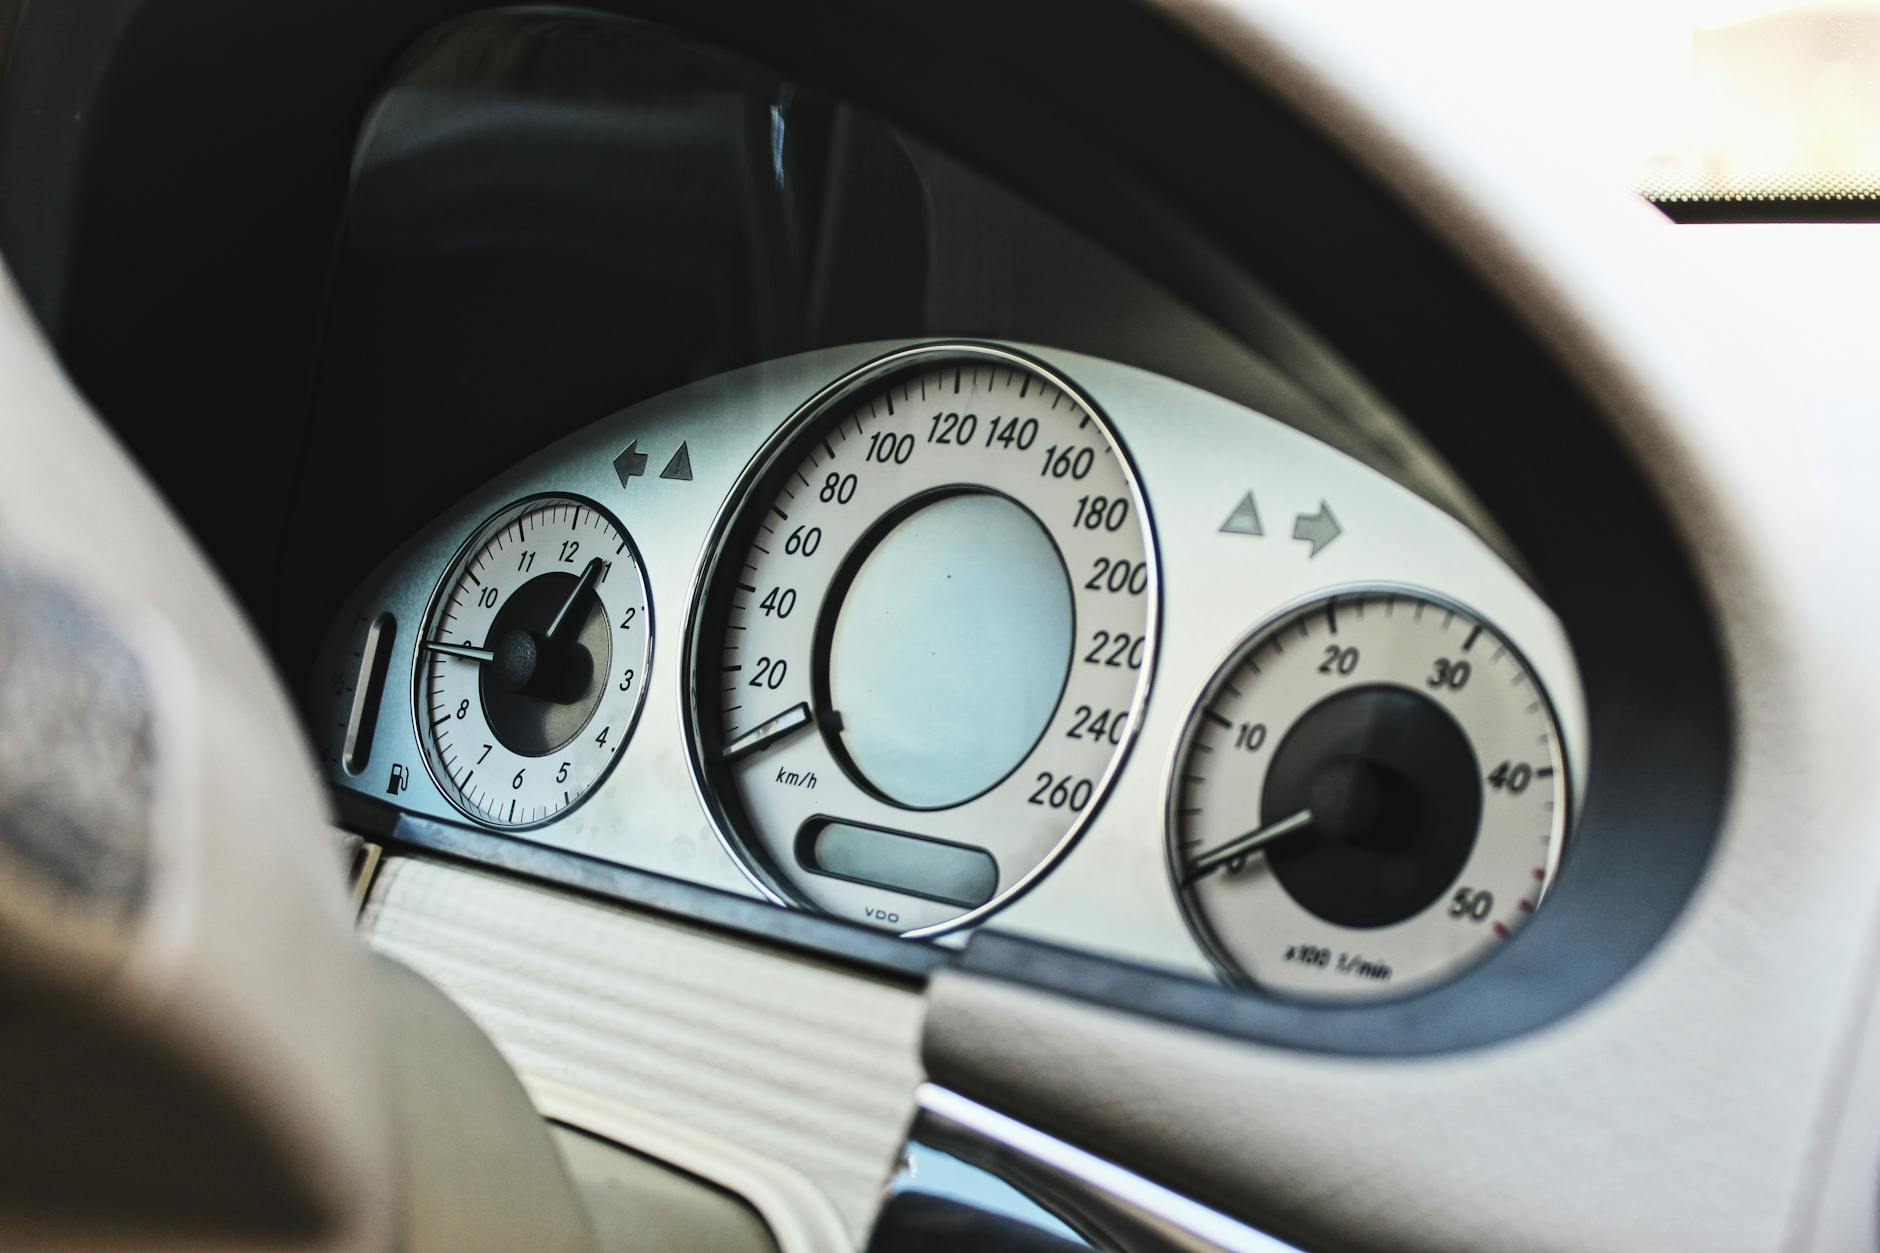 Front instrument panel in car in daylight